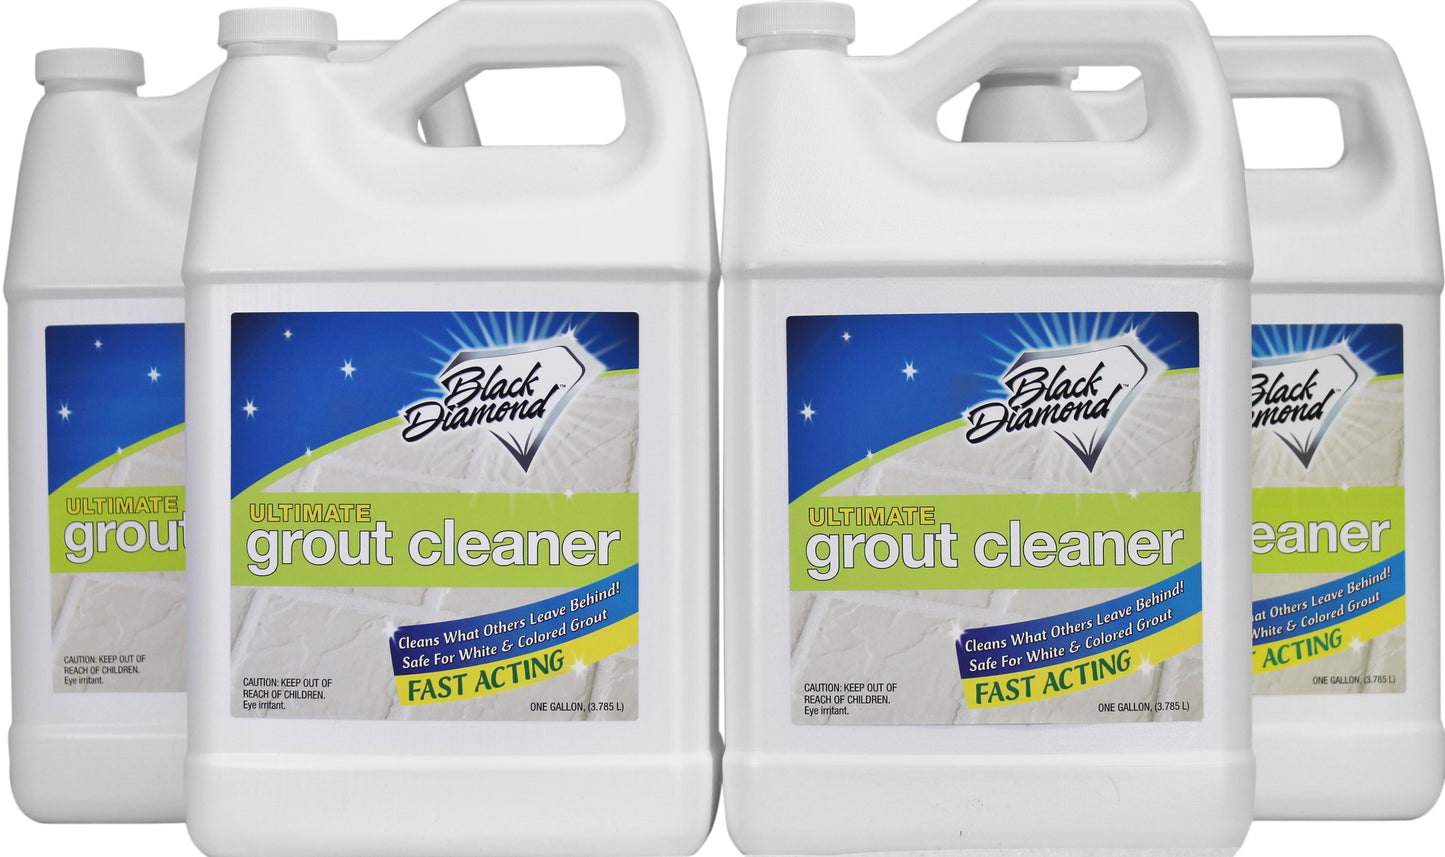  Ultimate Grout Cleaner Spray for Tile - Heavy Duty